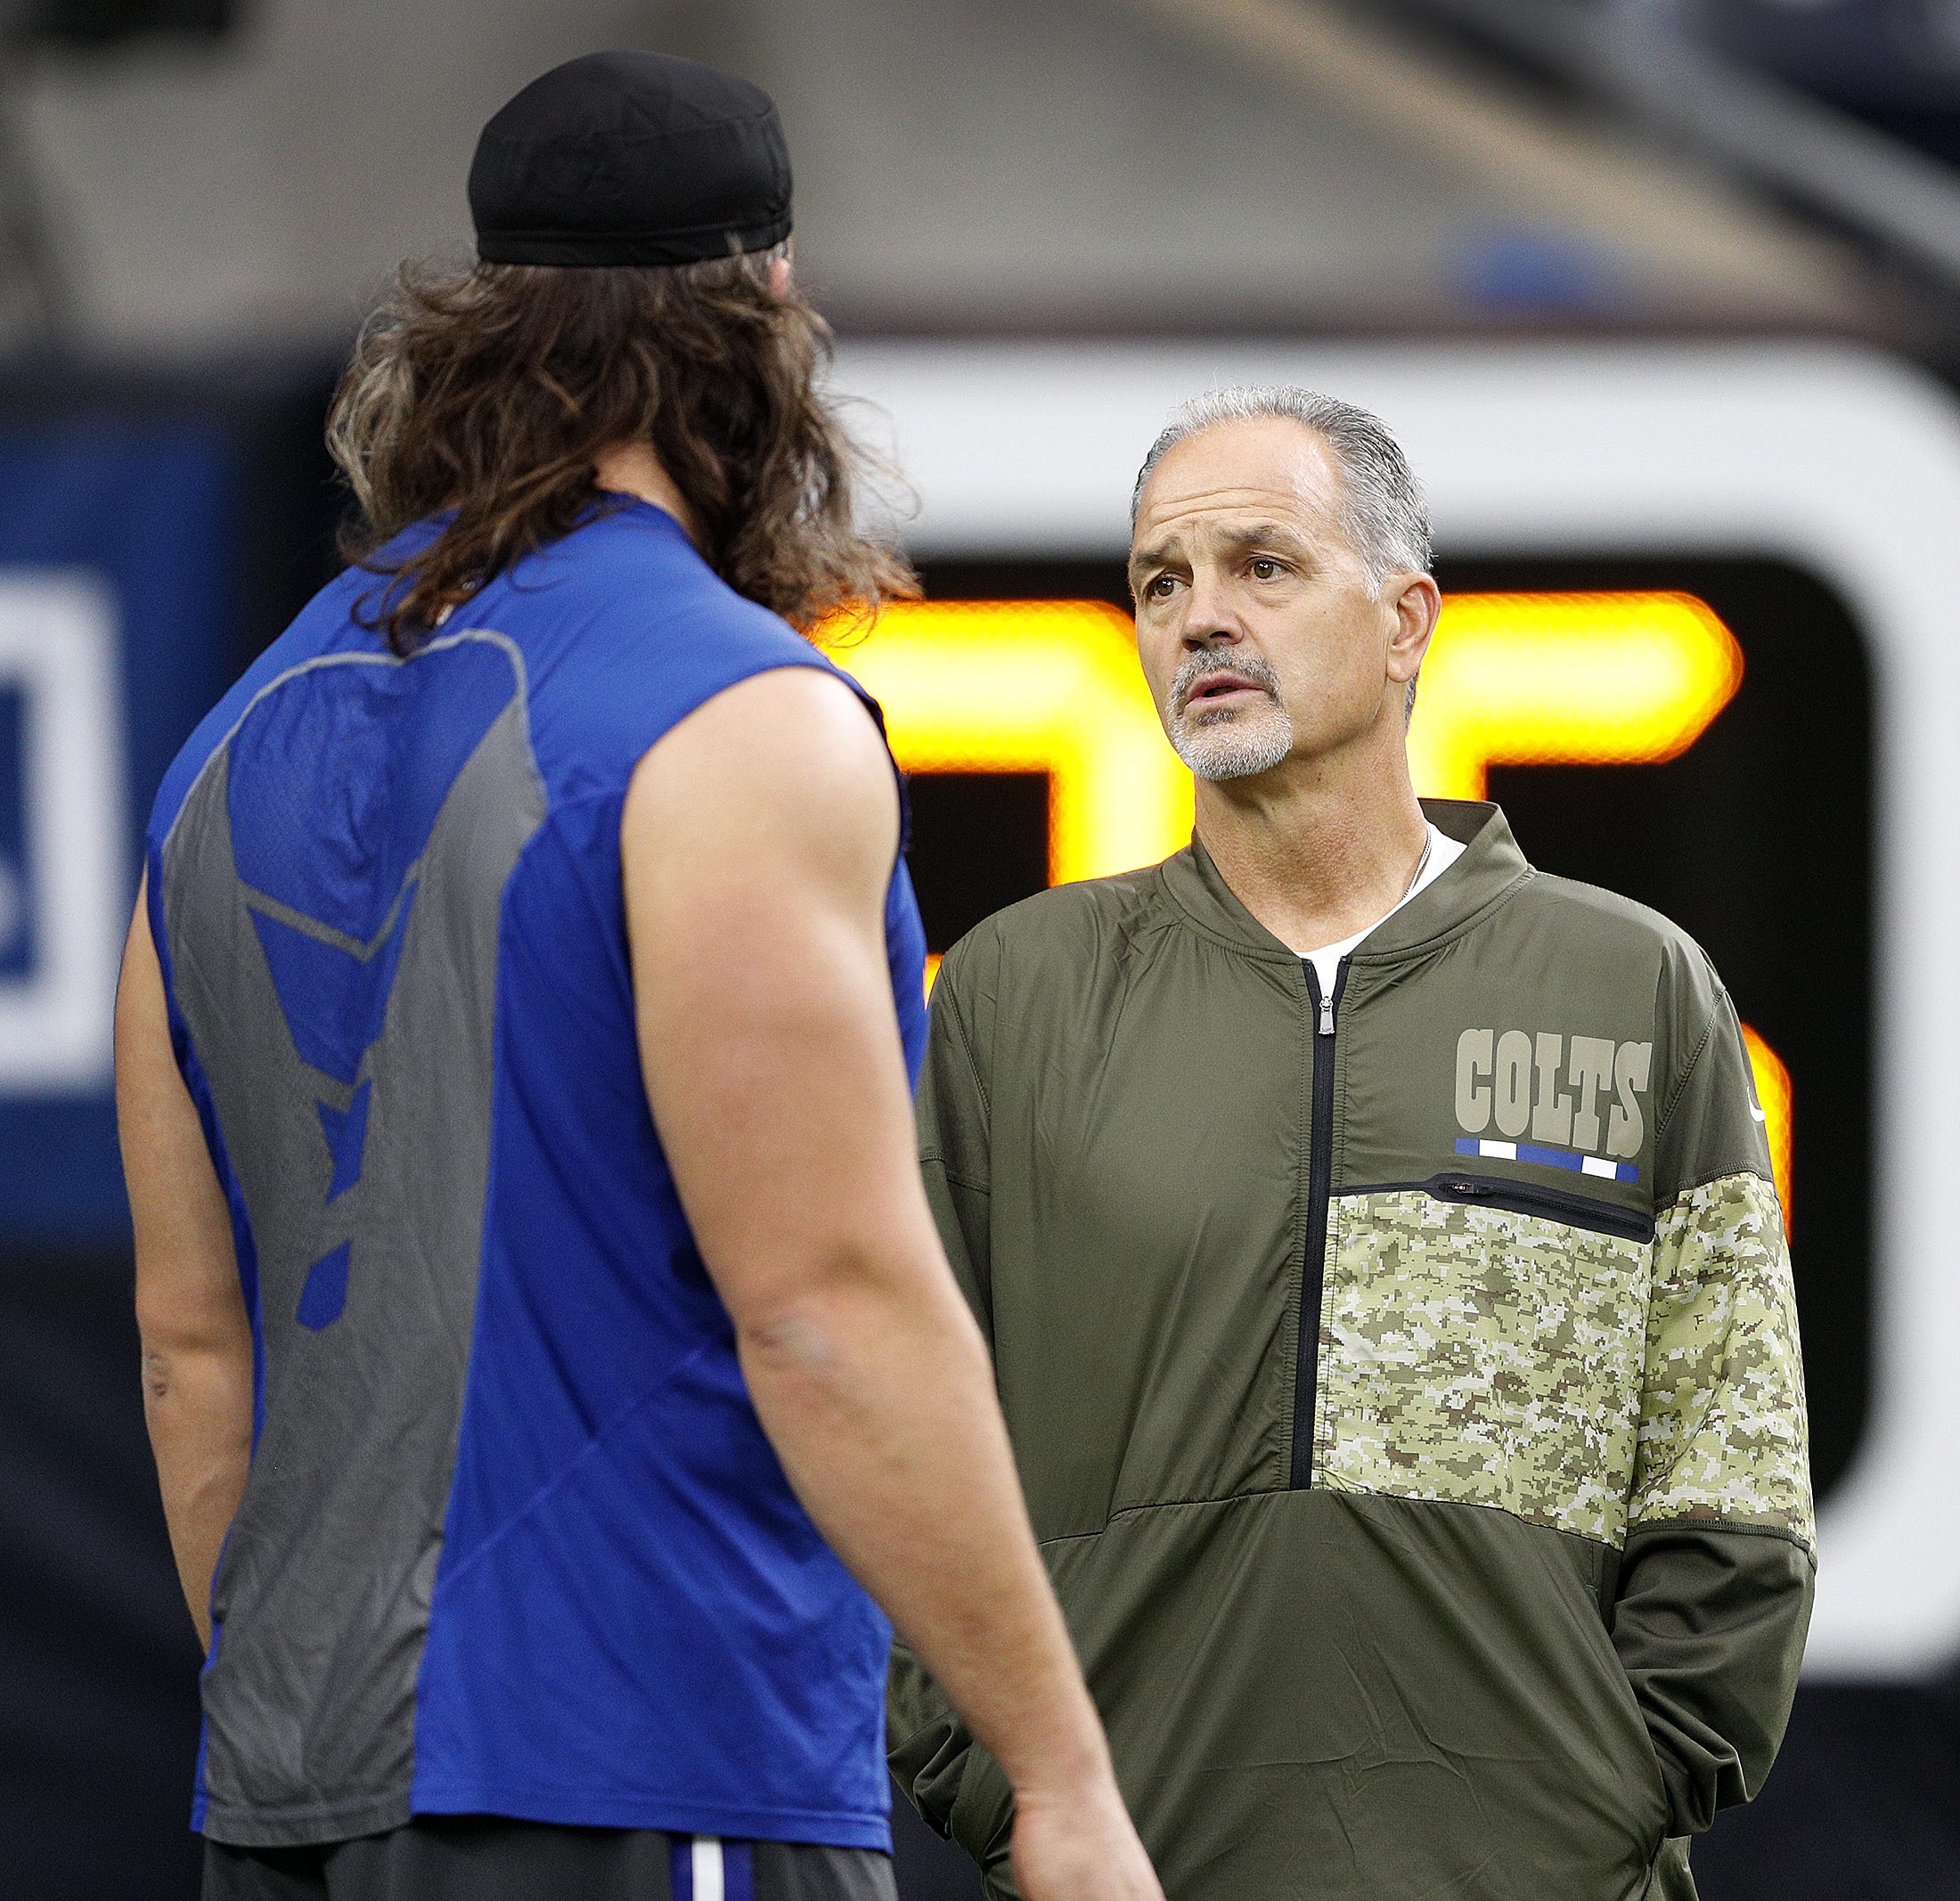 Ex-Colts coach Chuck Pagano on Urban Meyer: 'Don't know how I could walk into that building'